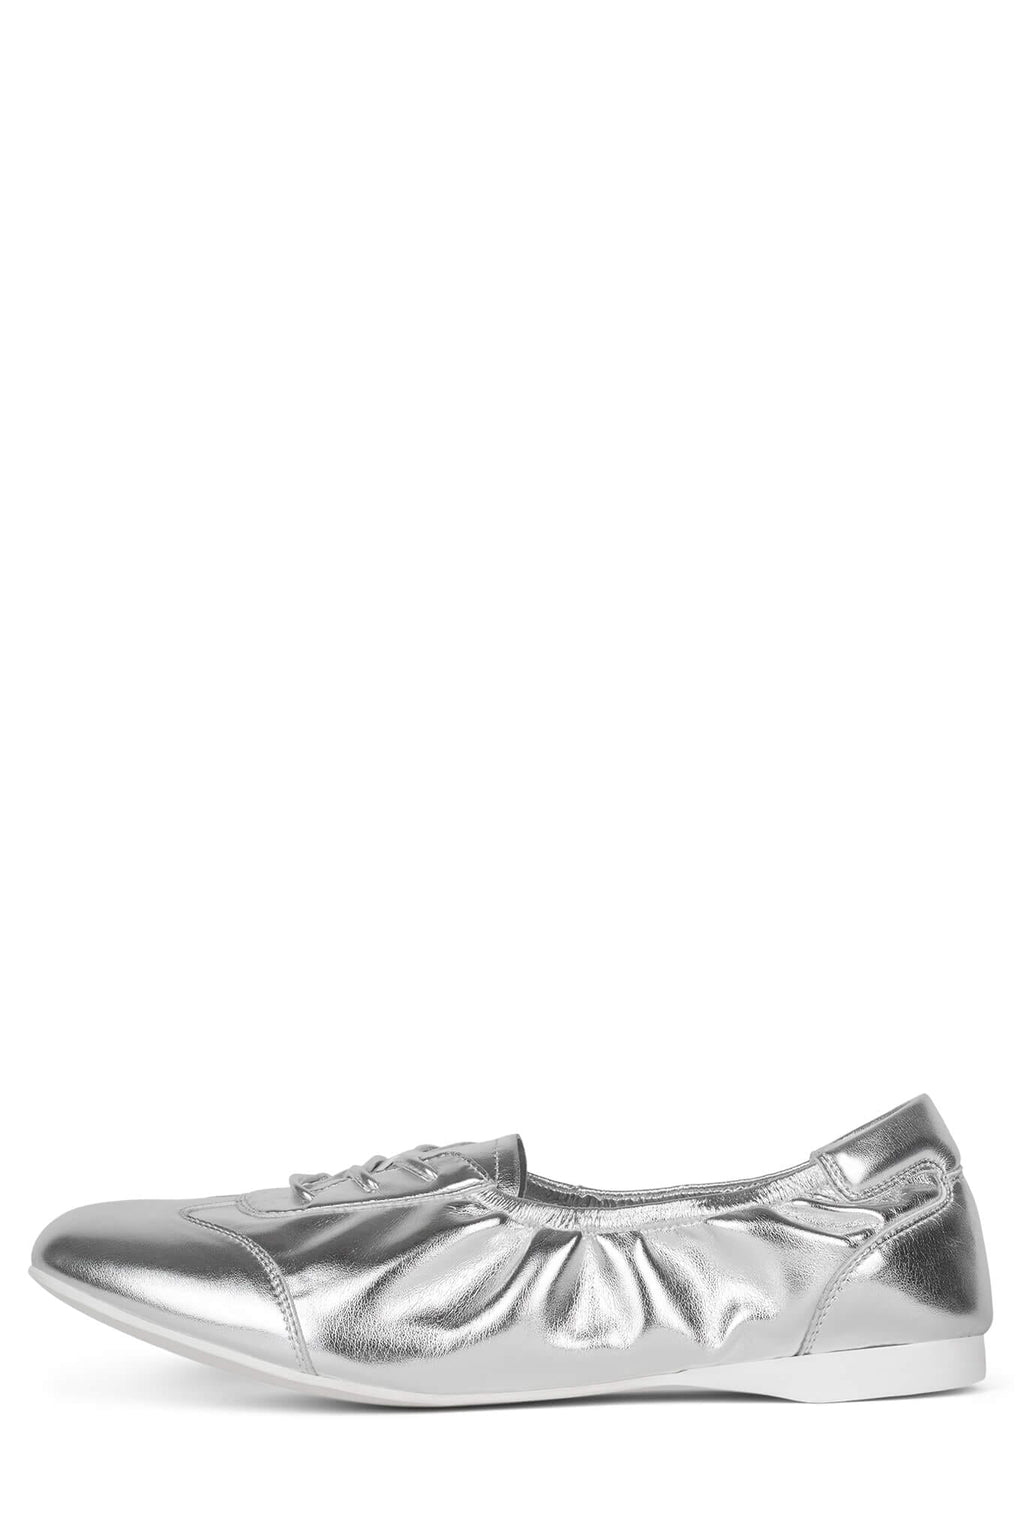 SCRIMMAGE Jeffrey Campbell Flats Silver